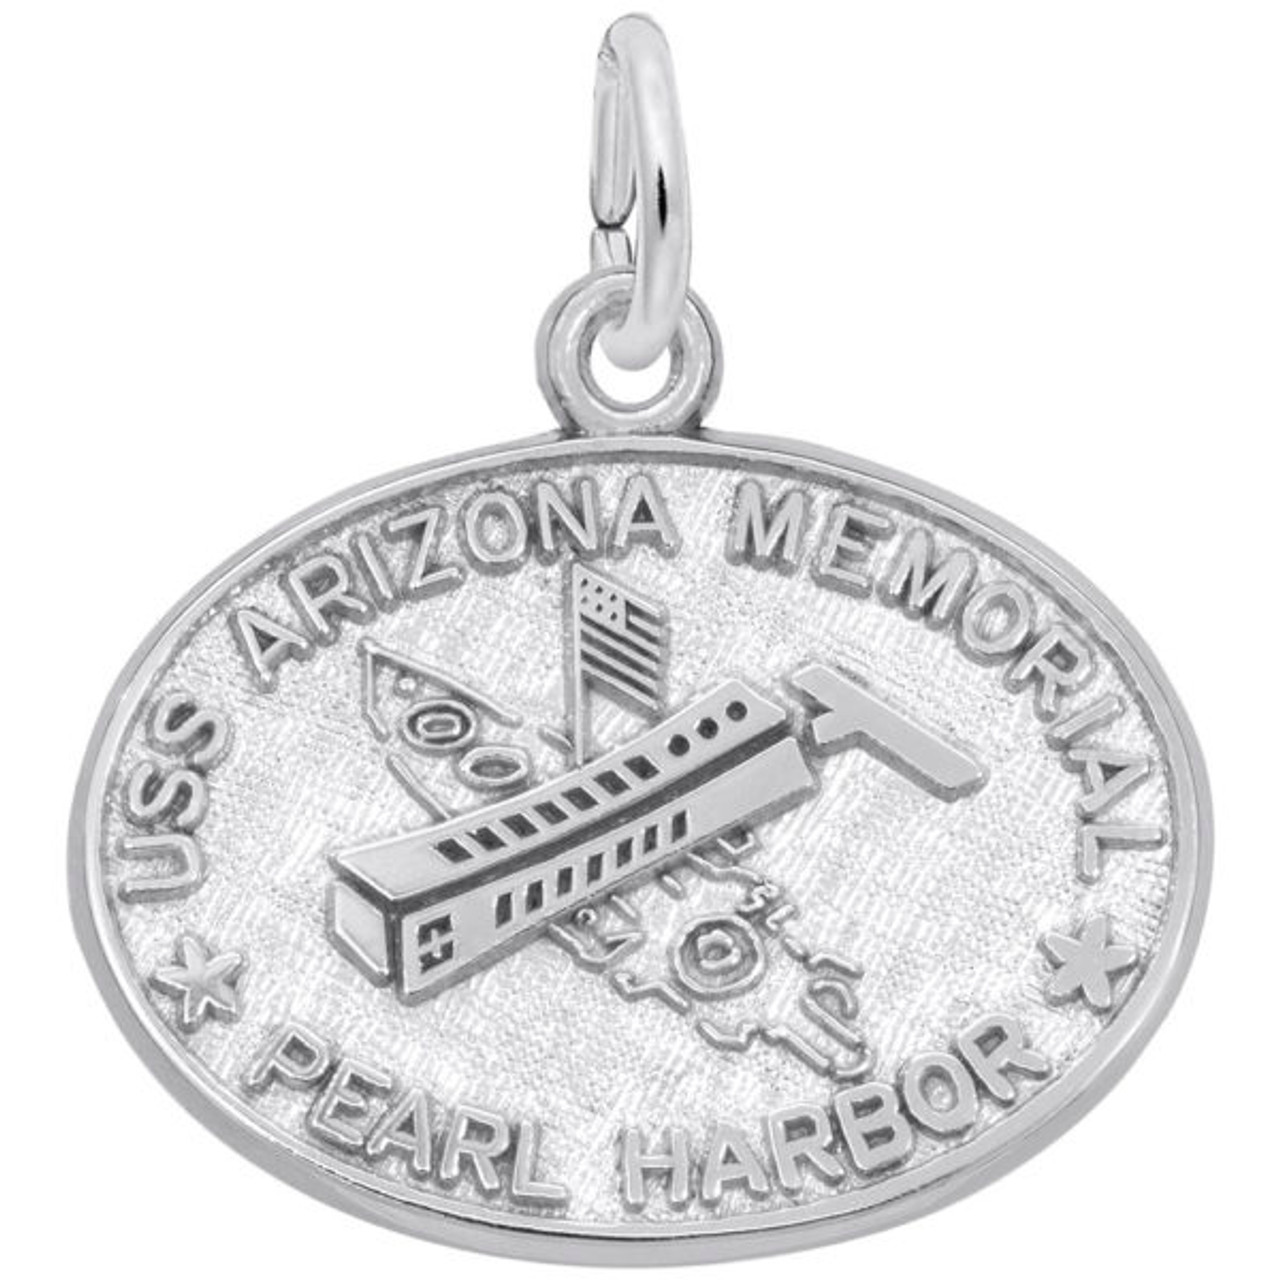 USS Arizona Pearl Harbor Memorial Silver Charm - Sterling Silver and 14k White Gold